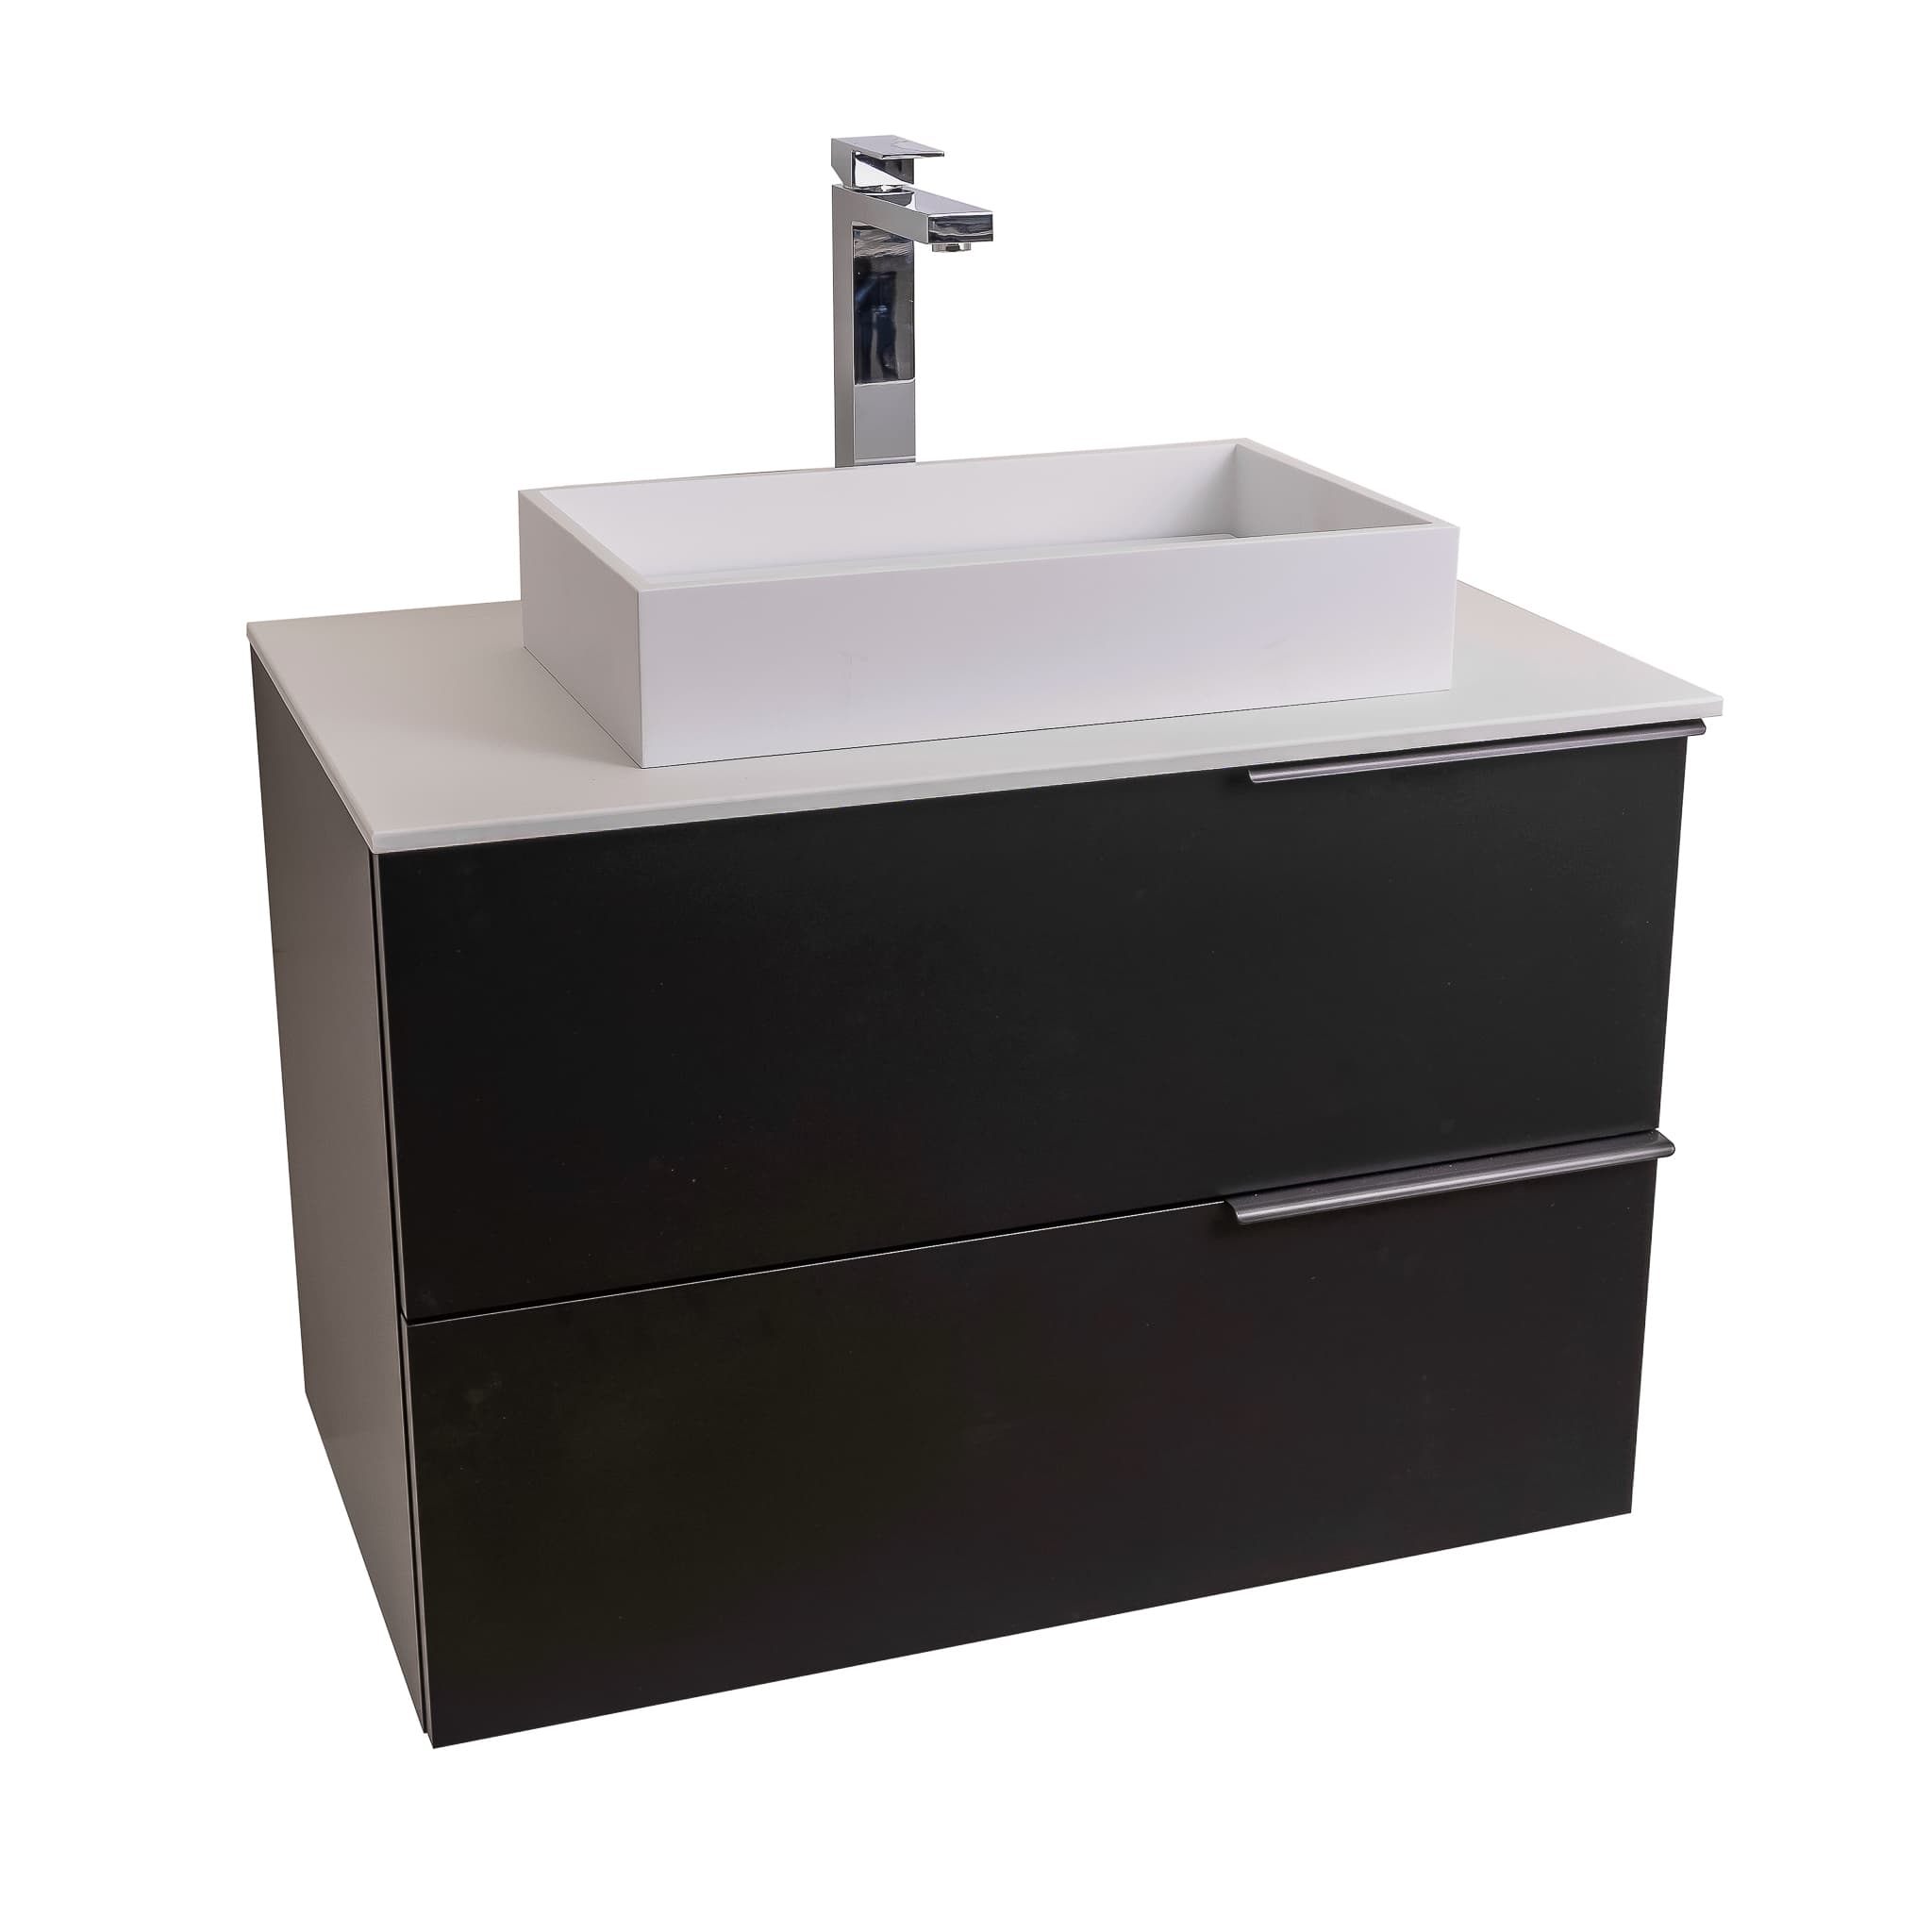 Mallorca 39.5 Matte Black Cabinet, Solid Surface Flat White Counter And Infinity Square Solid Surface White Basin 1329, Wall Mounted Modern Vanity Set